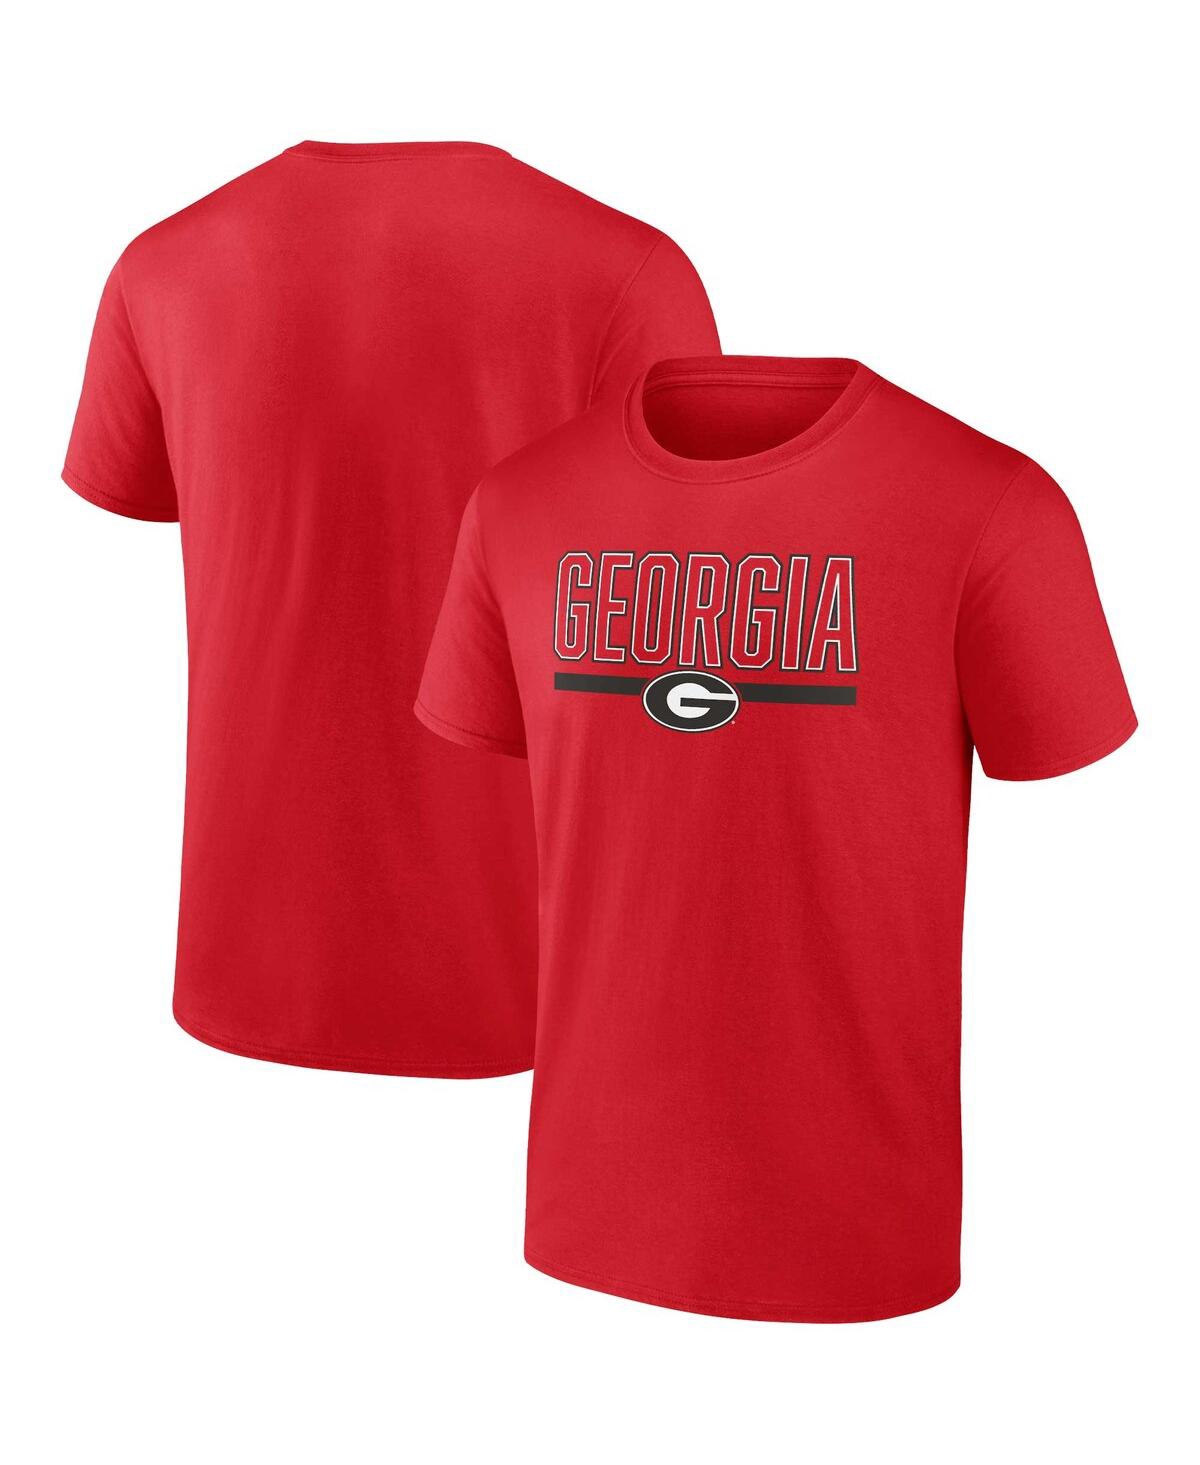 Men's Profile Red Georgia Bulldogs Big and Tall Team T-shirt - Red